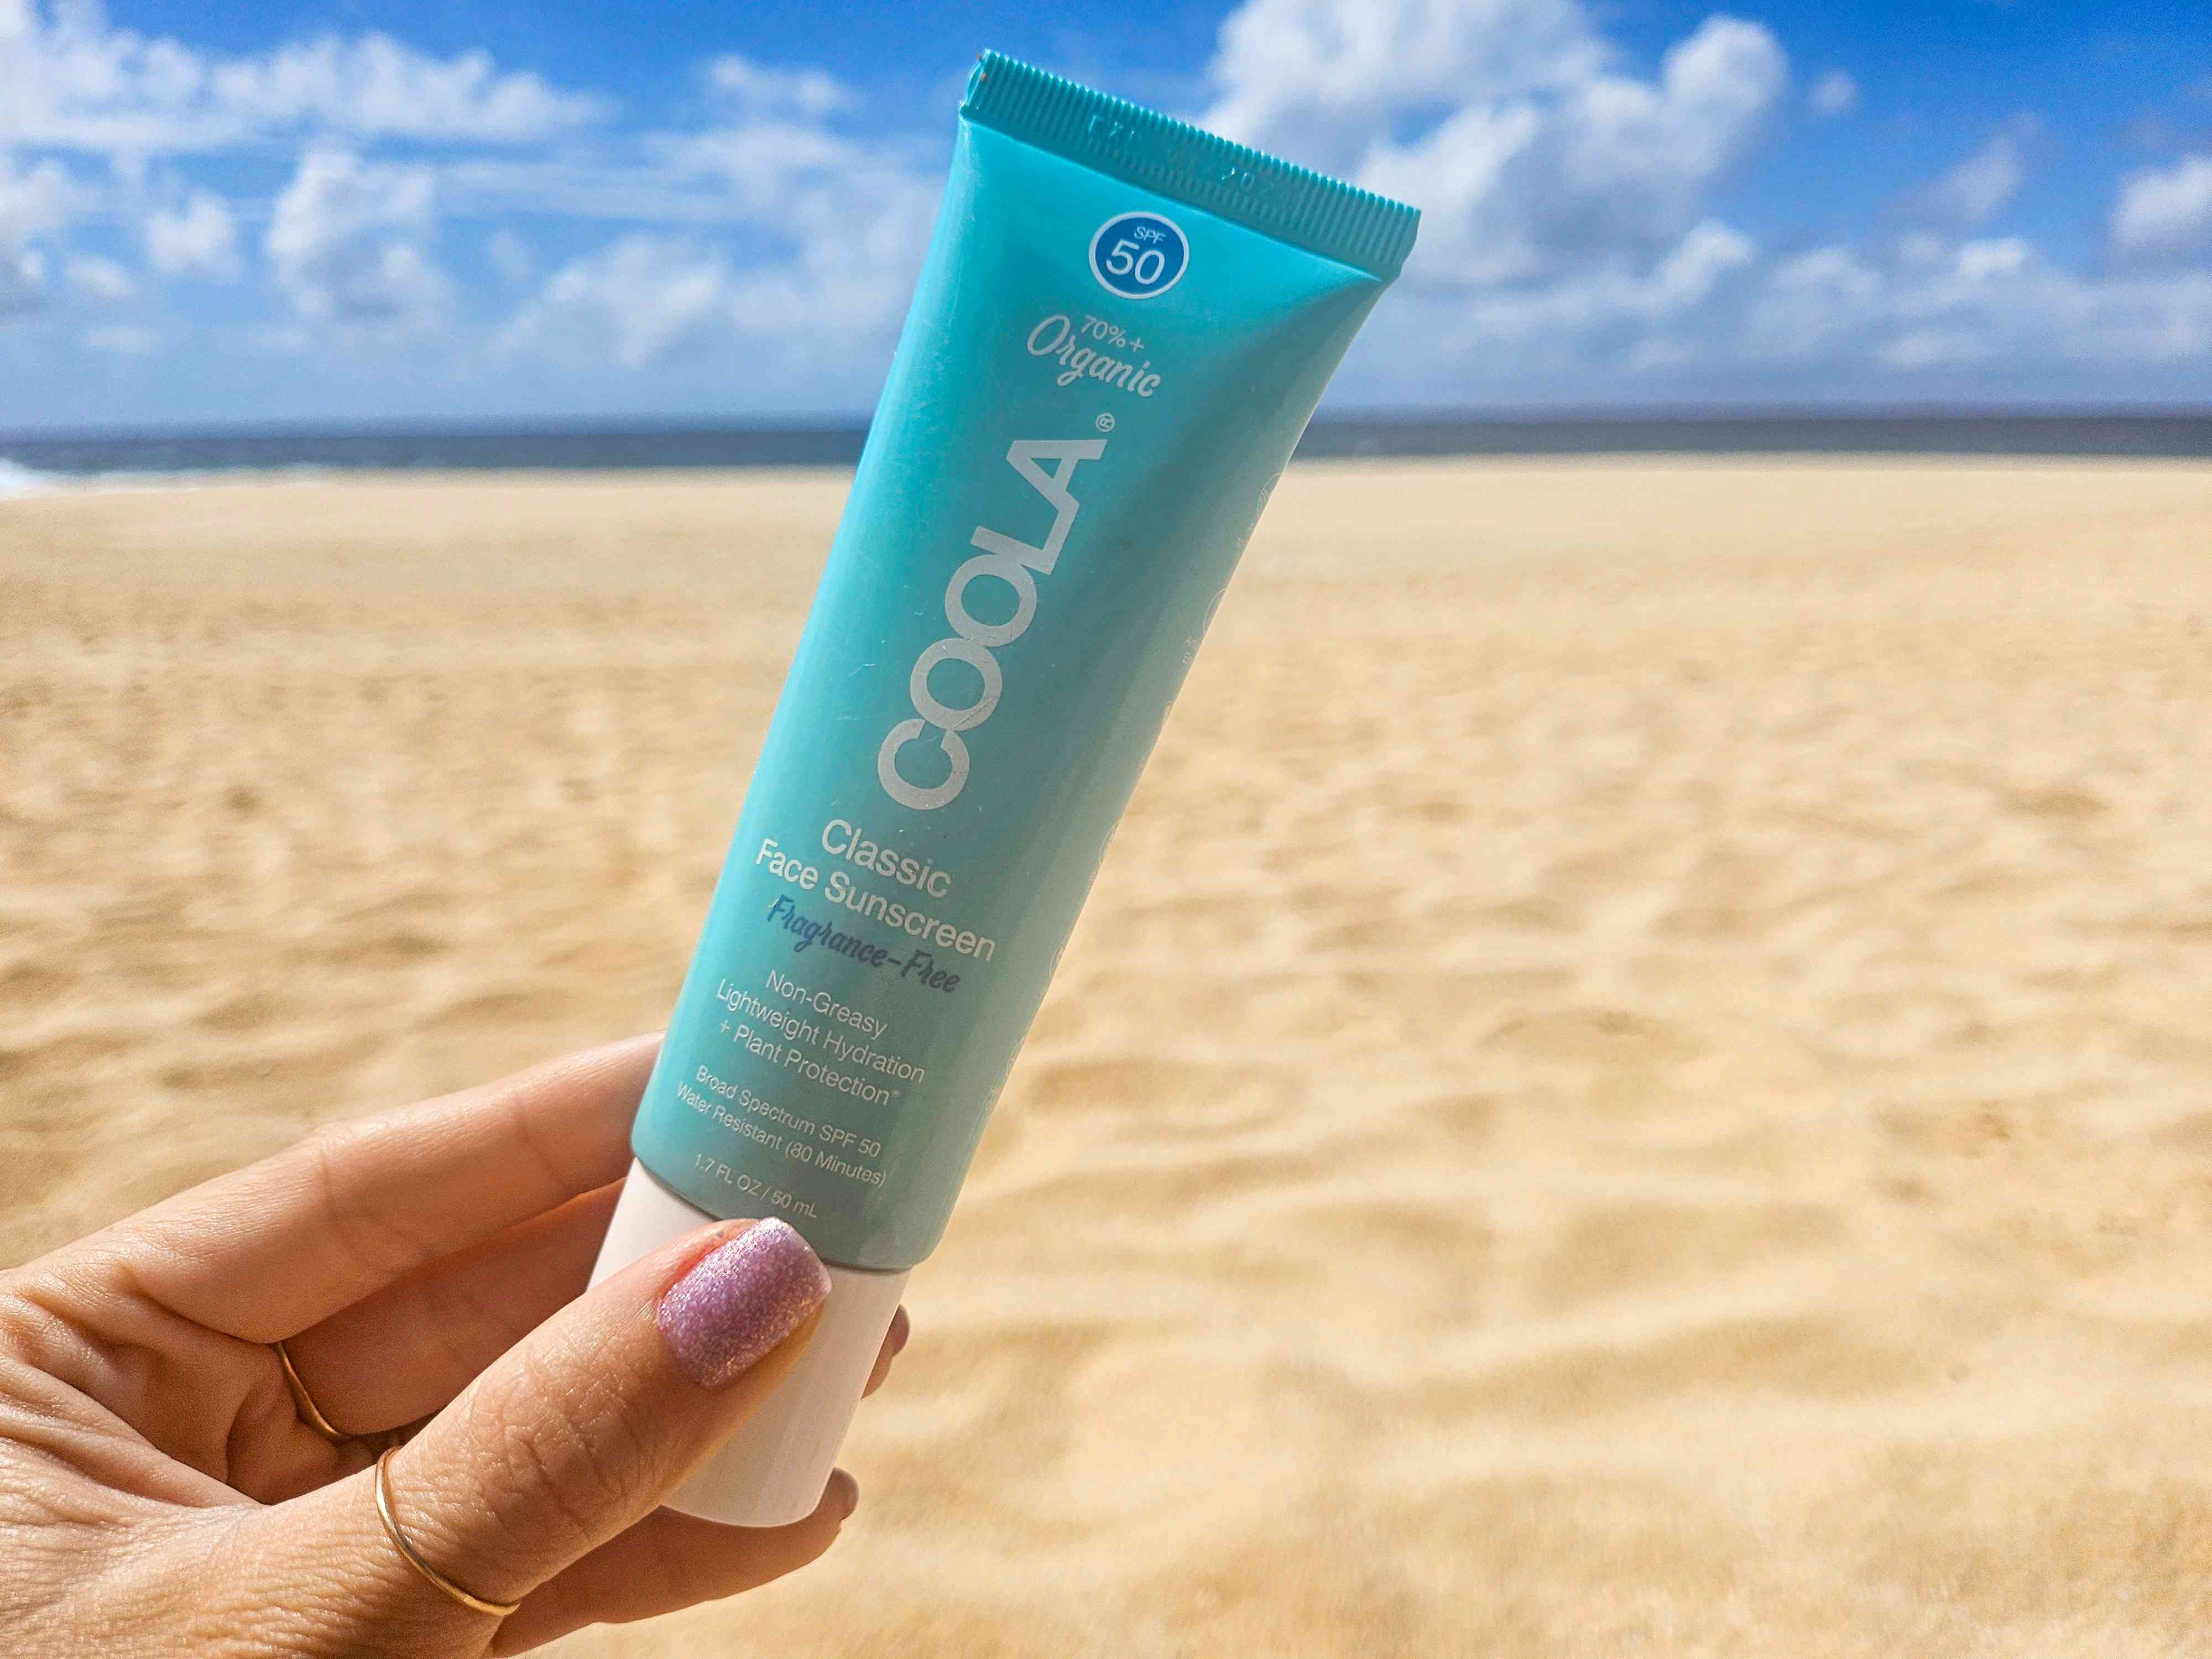 Hand holding the Coola Organic Face Sunscreen with sand and blue sky in background